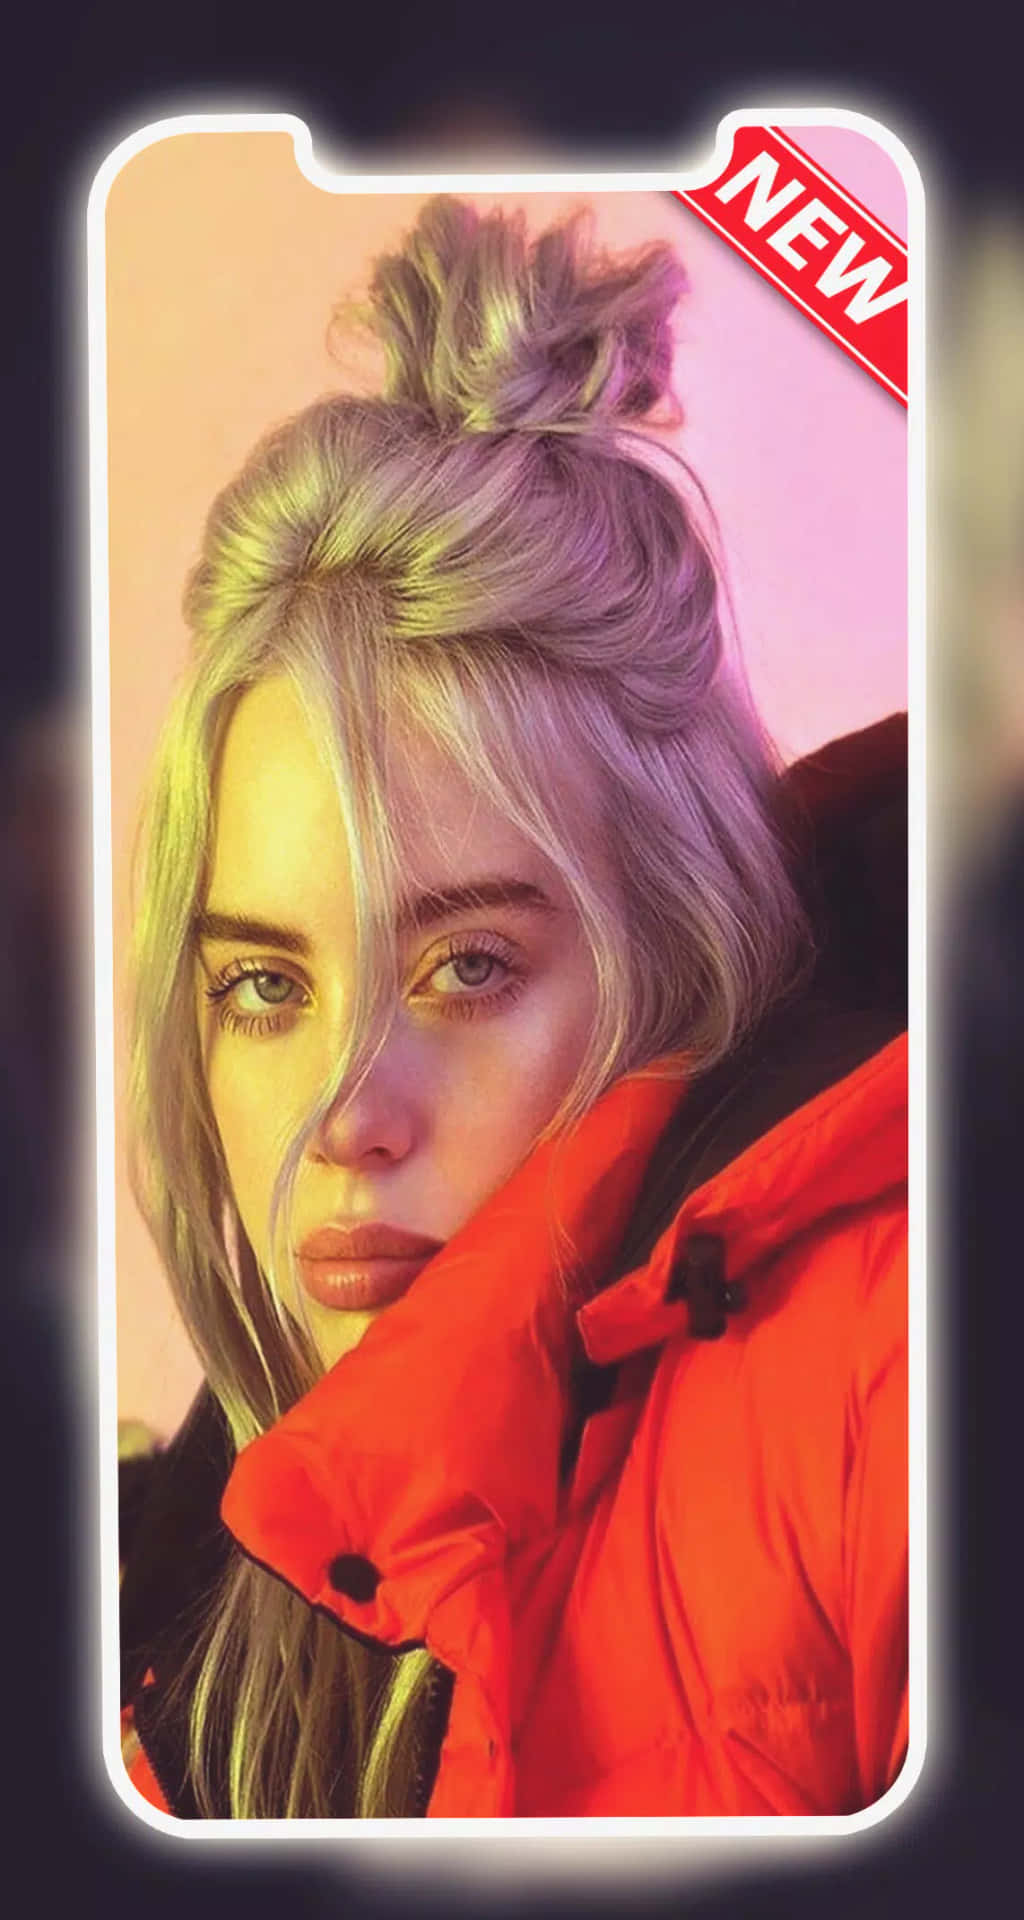 Billie Eilish takes the world by storm in 2021. Wallpaper